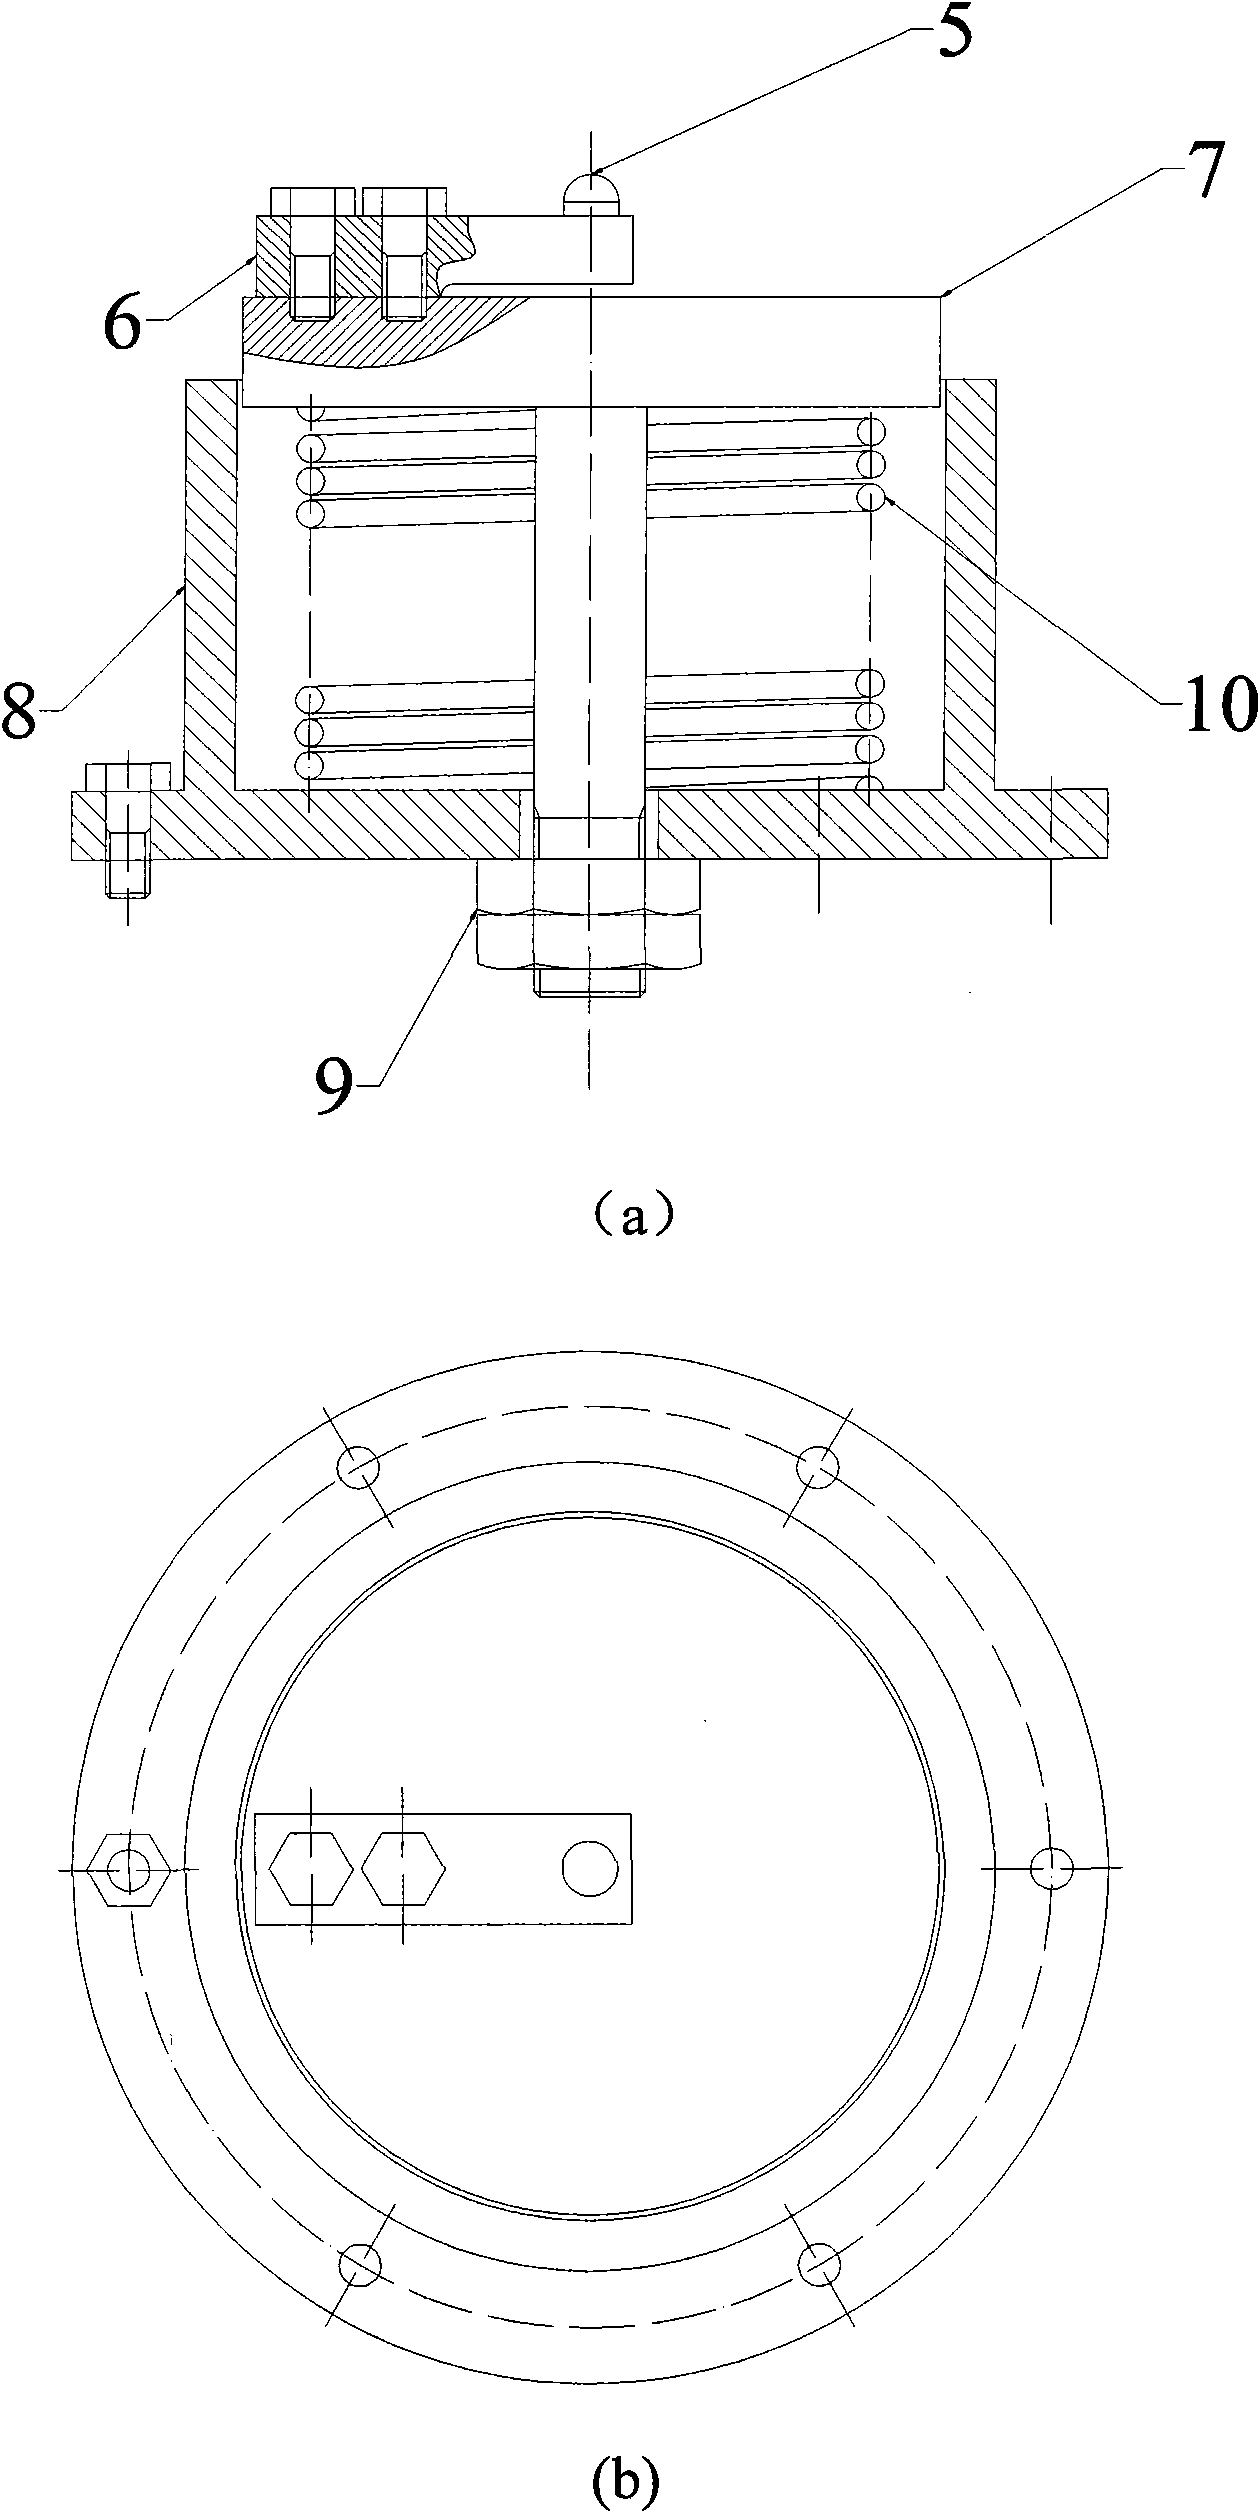 Step-type spring supporting vehicle axle load measurement device